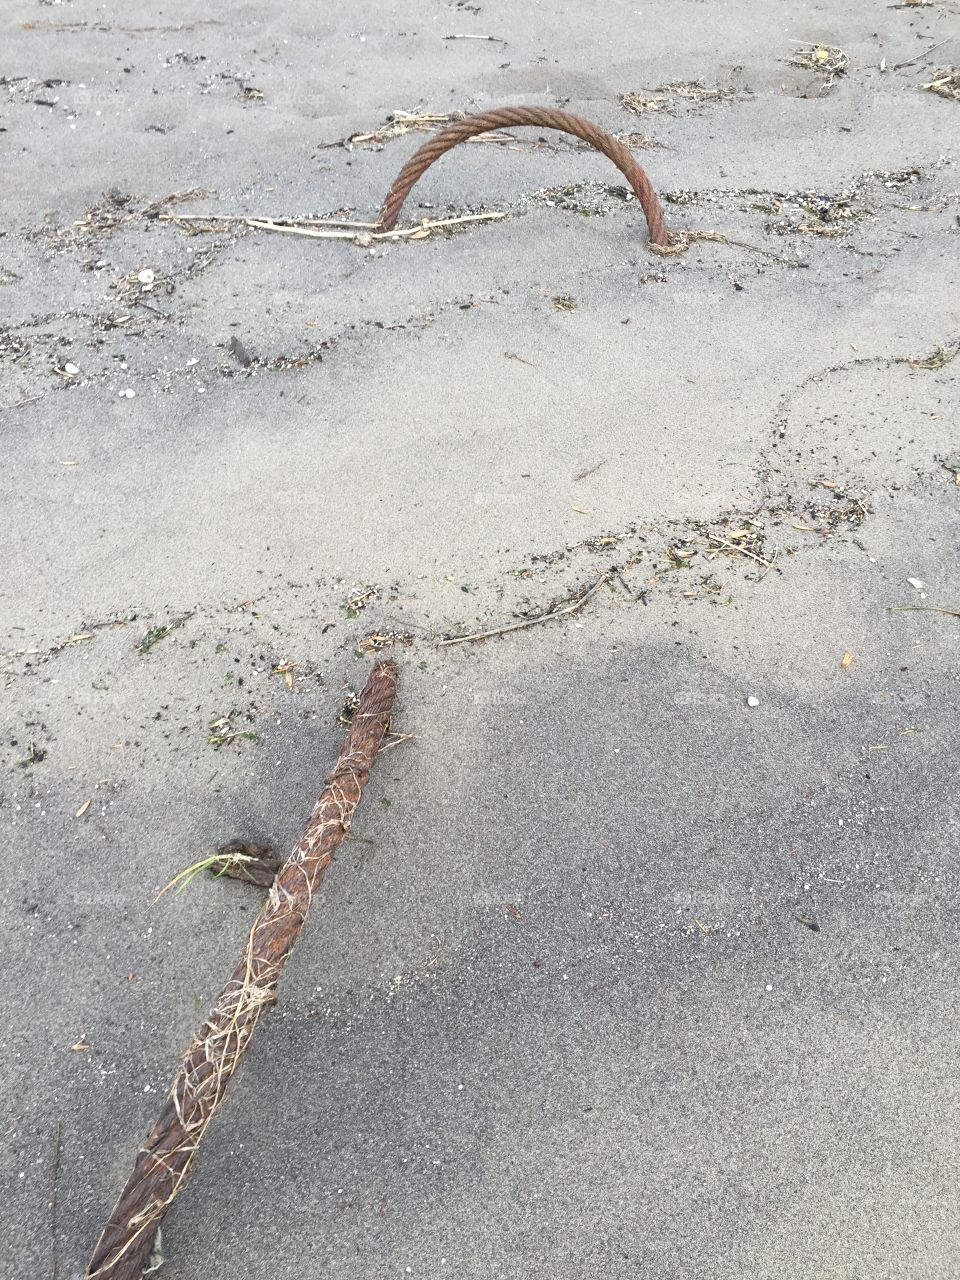 Rustic cable stuck in the sand